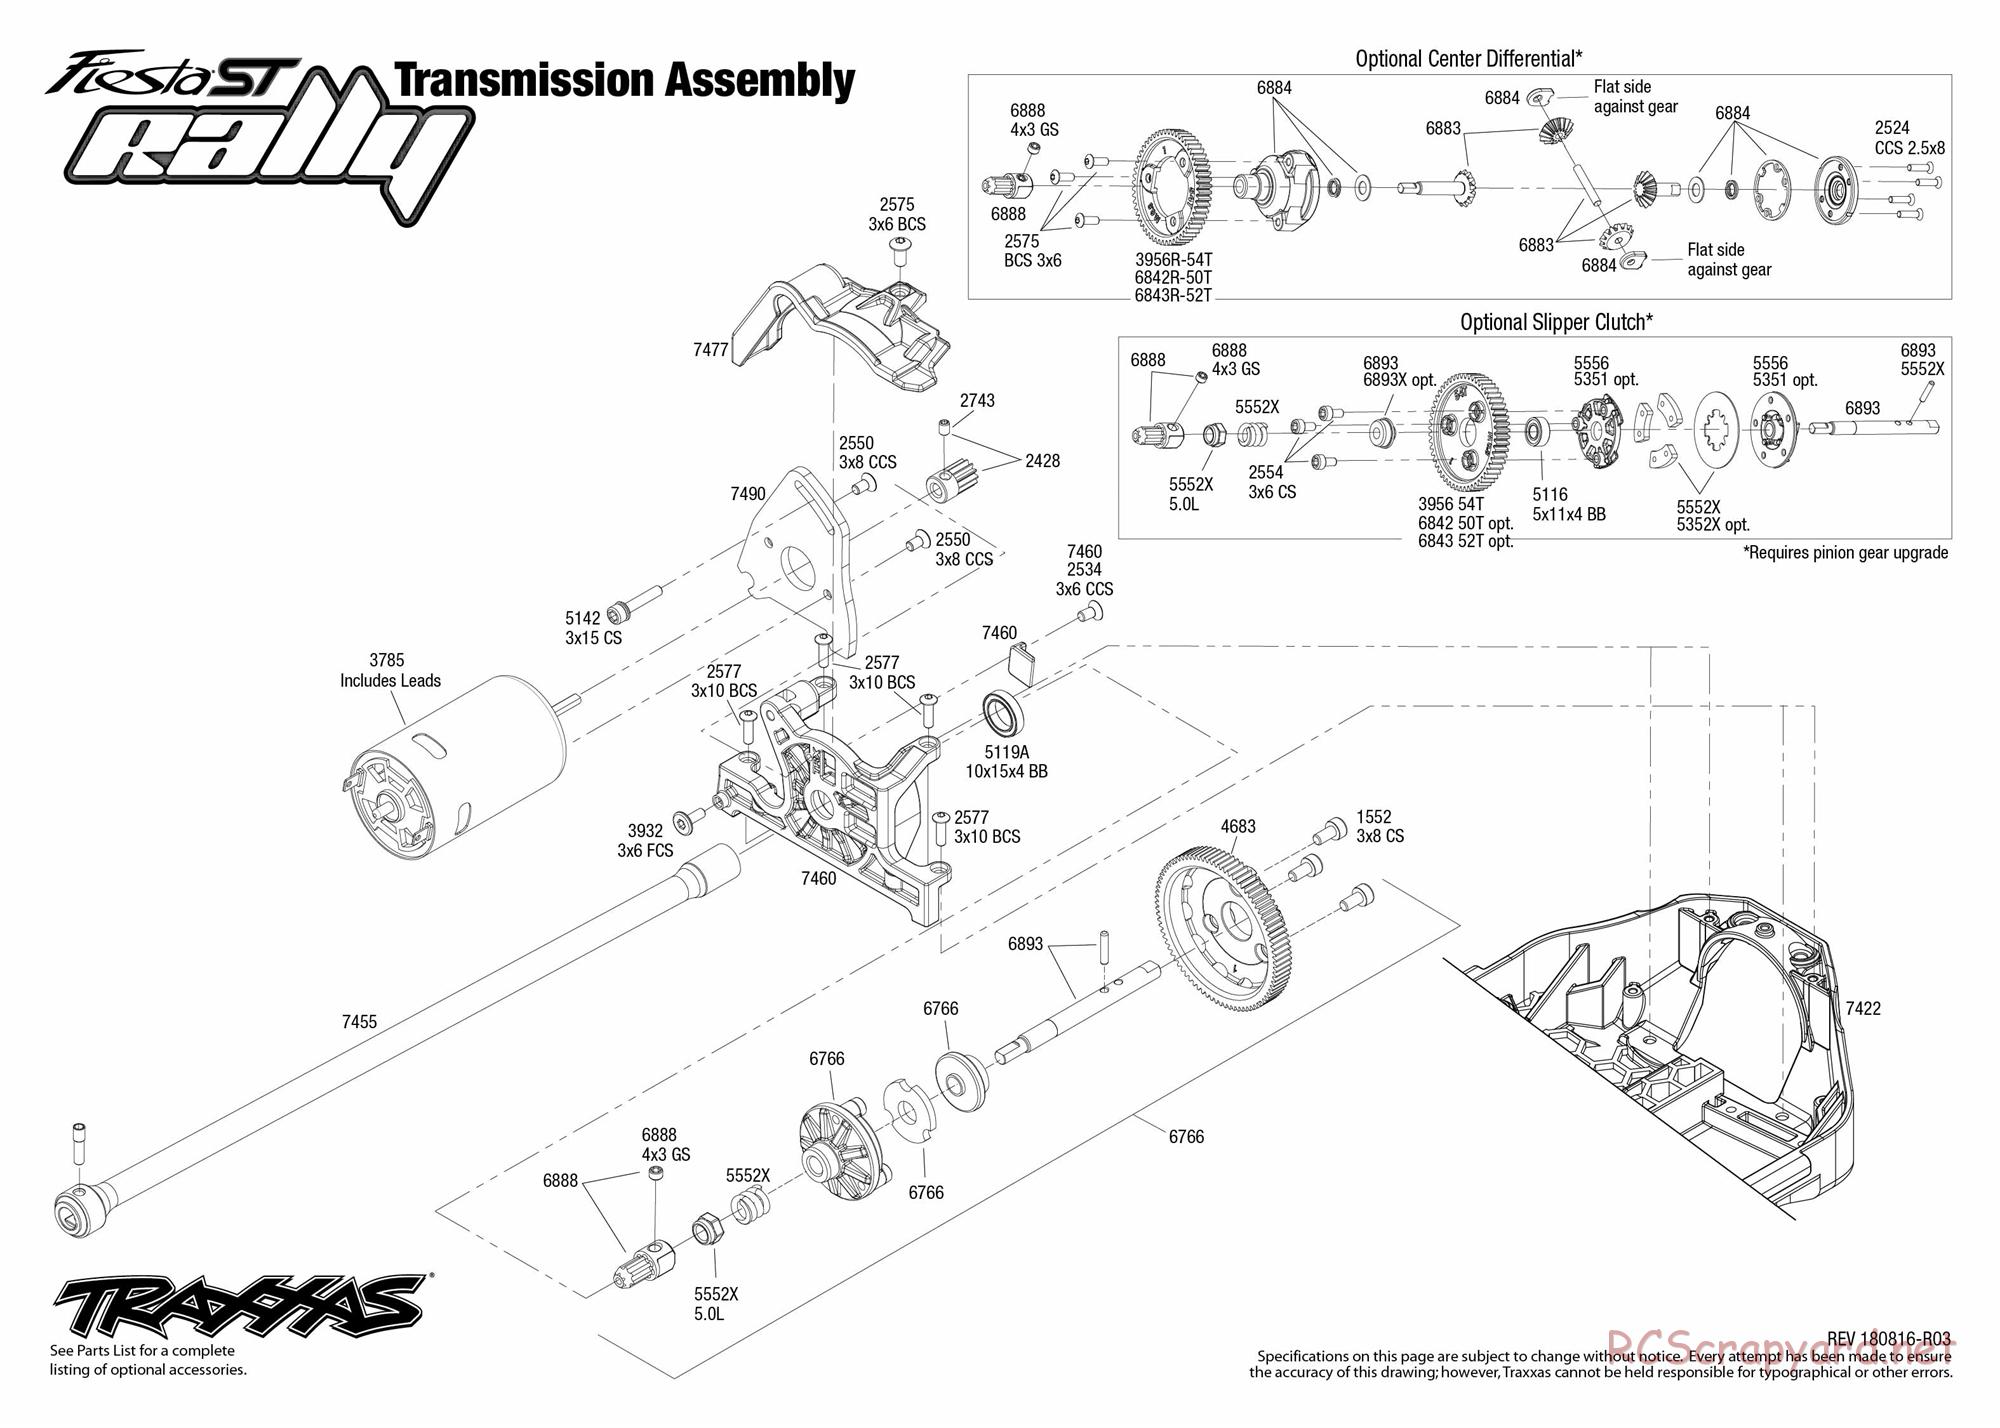 Traxxas - Ford Fiesta ST - NOS Deegan 38 Rally - Exploded Views - Page 5